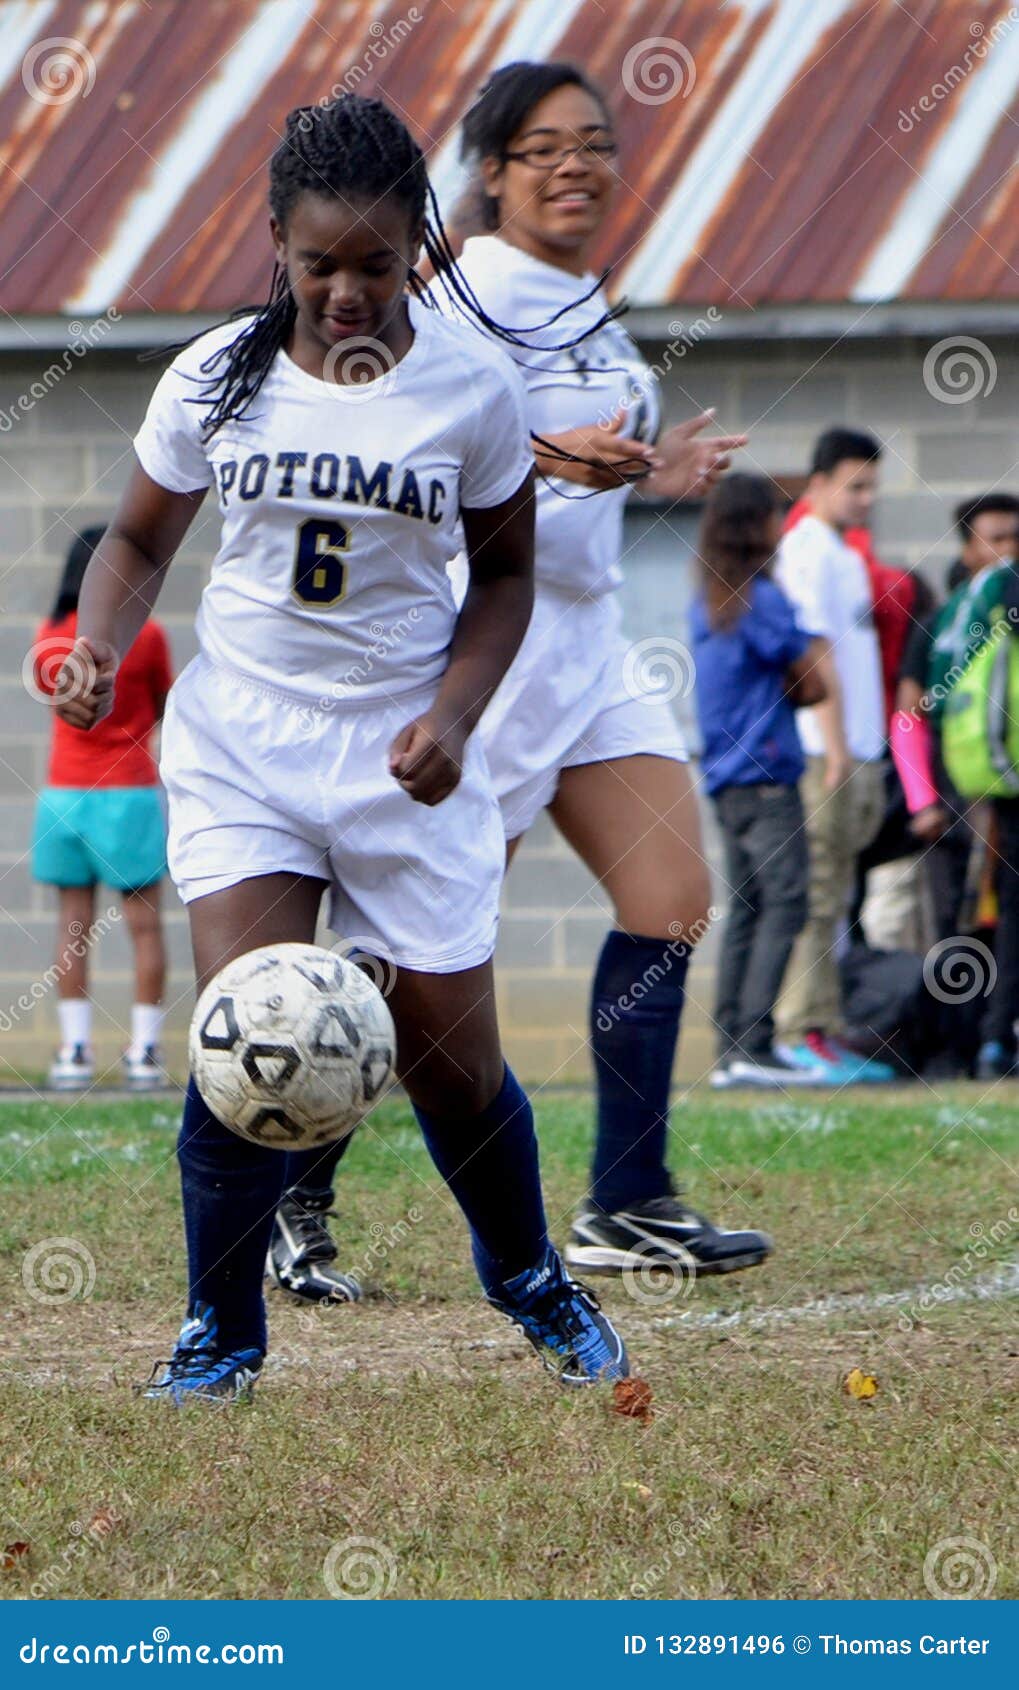 552 High School Girls Soccer Photos Free Royalty Free Stock Photos From Dreamstime